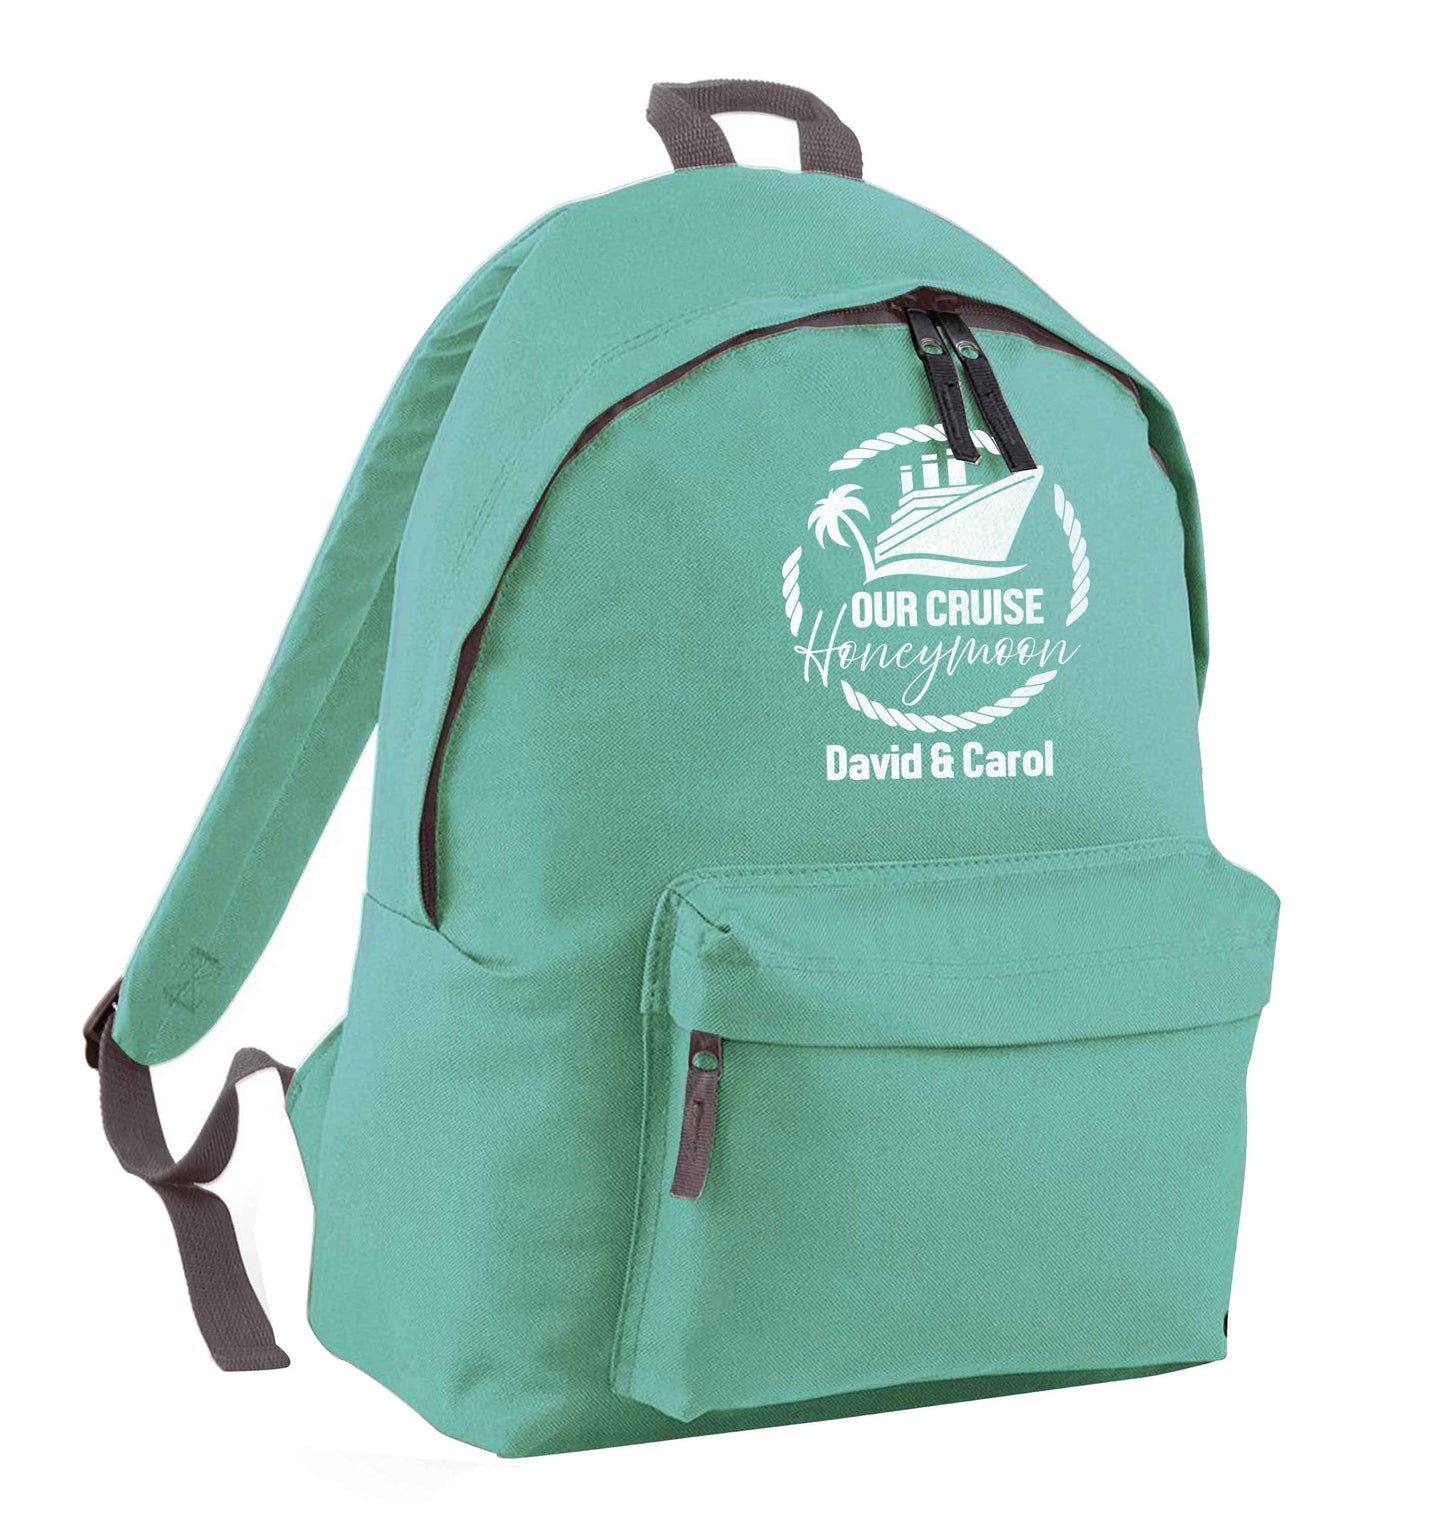 Our cruise honeymoon personalised mint adults backpack